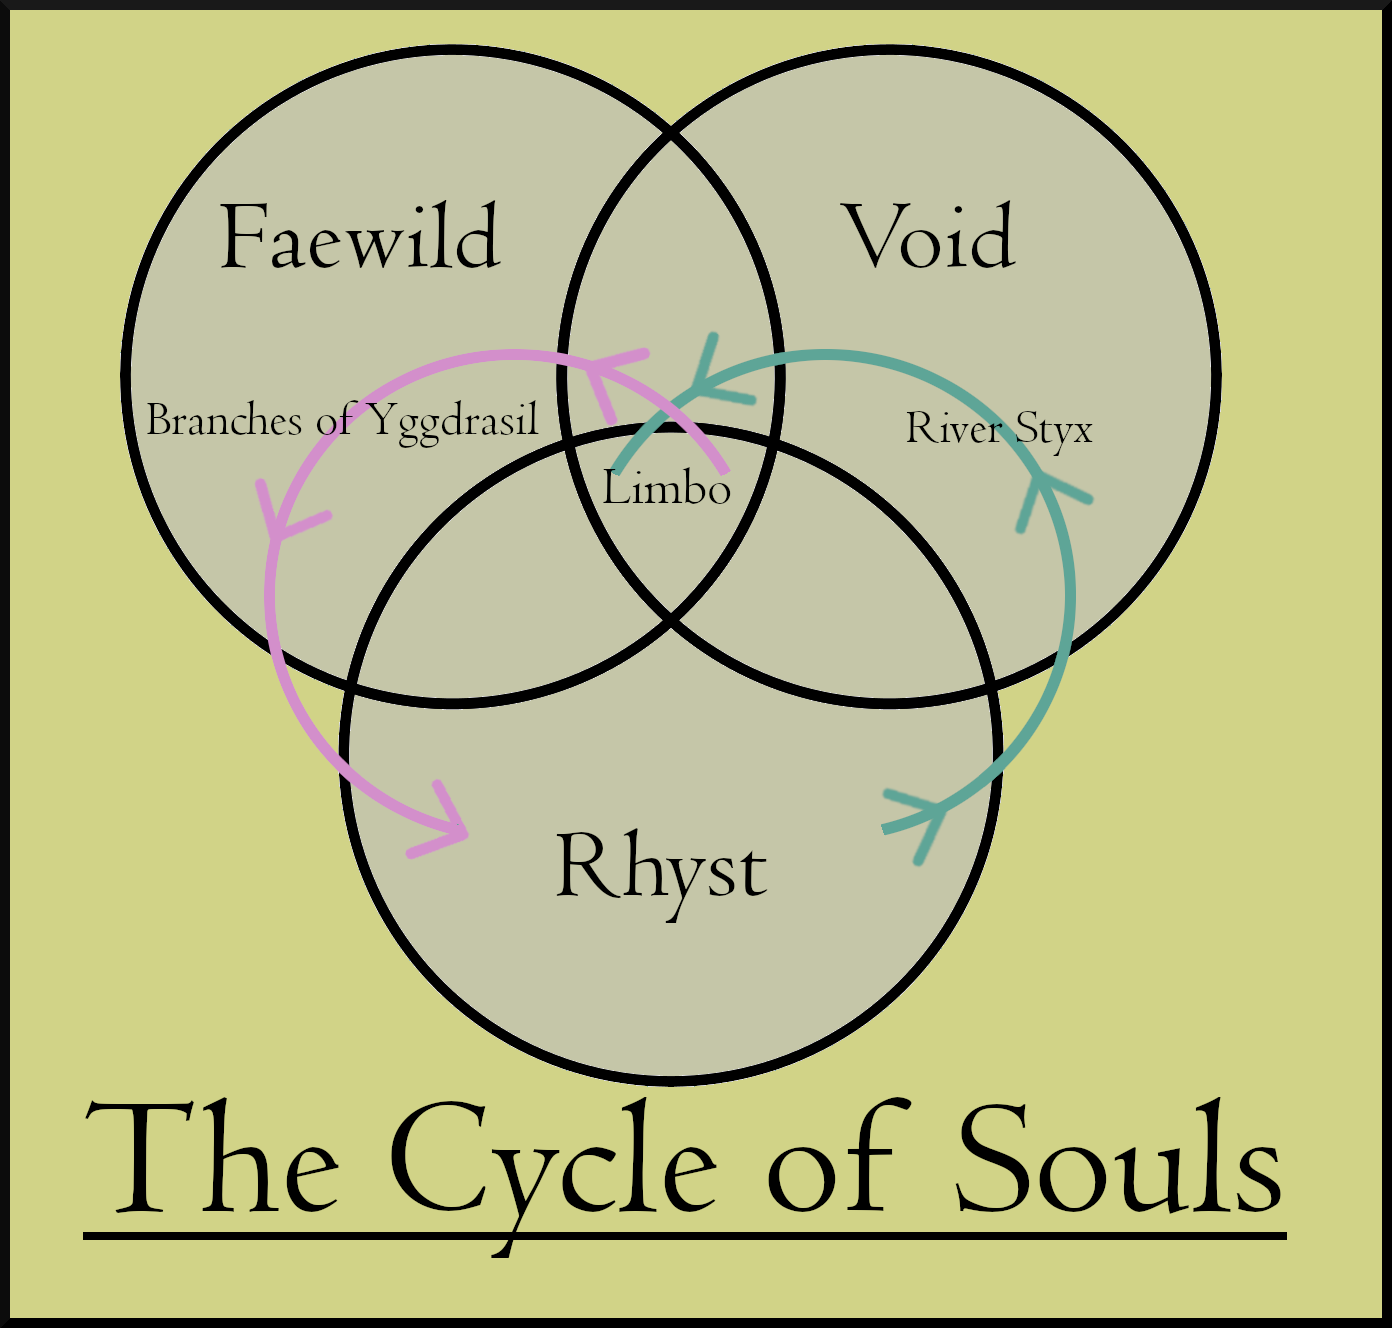 The Cycle of Souls